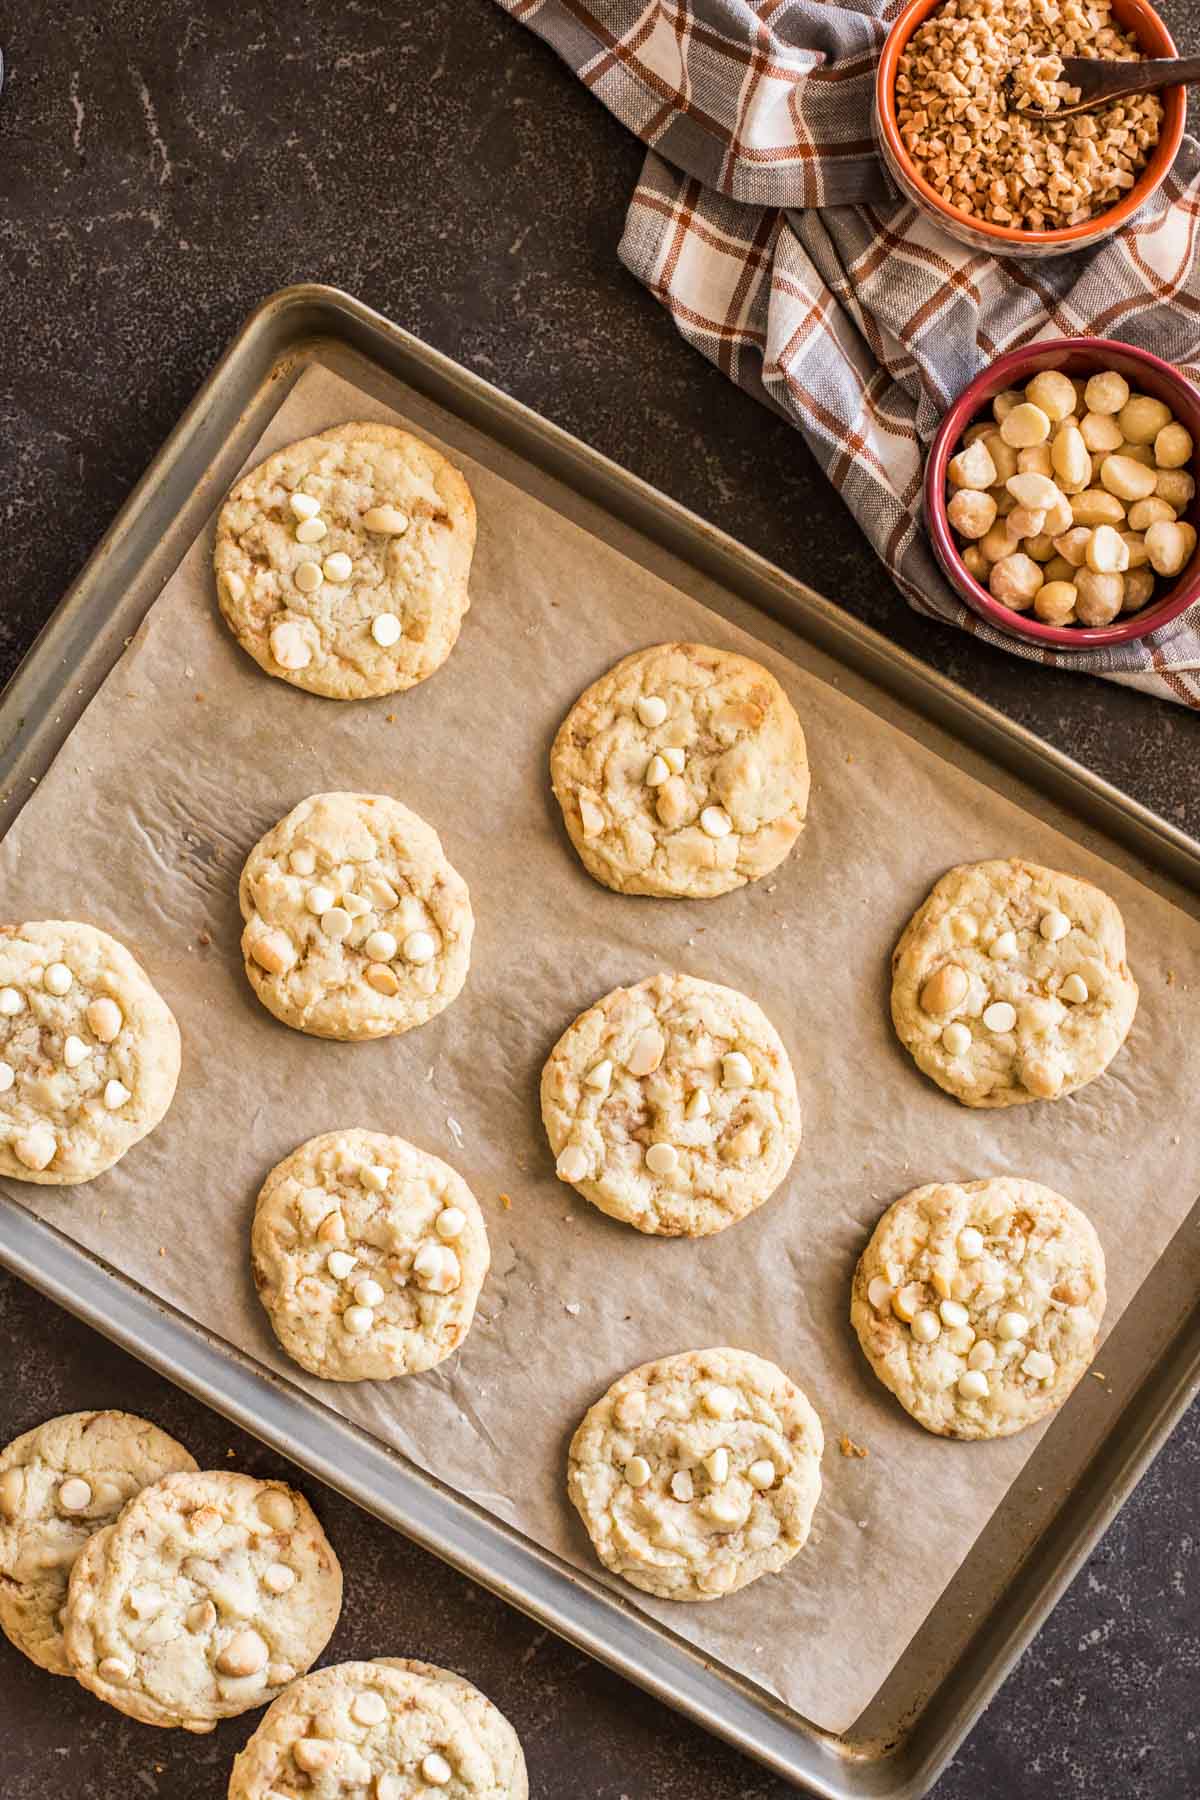 Buttery Toffee White Chocolate Chip Macadamia Nut Cookies on a parchment paper lined baking sheet, with more cookies sitting next to the pan, as well as a bowl of roasted salted macadamia nuts and a bowl of toffee bits.